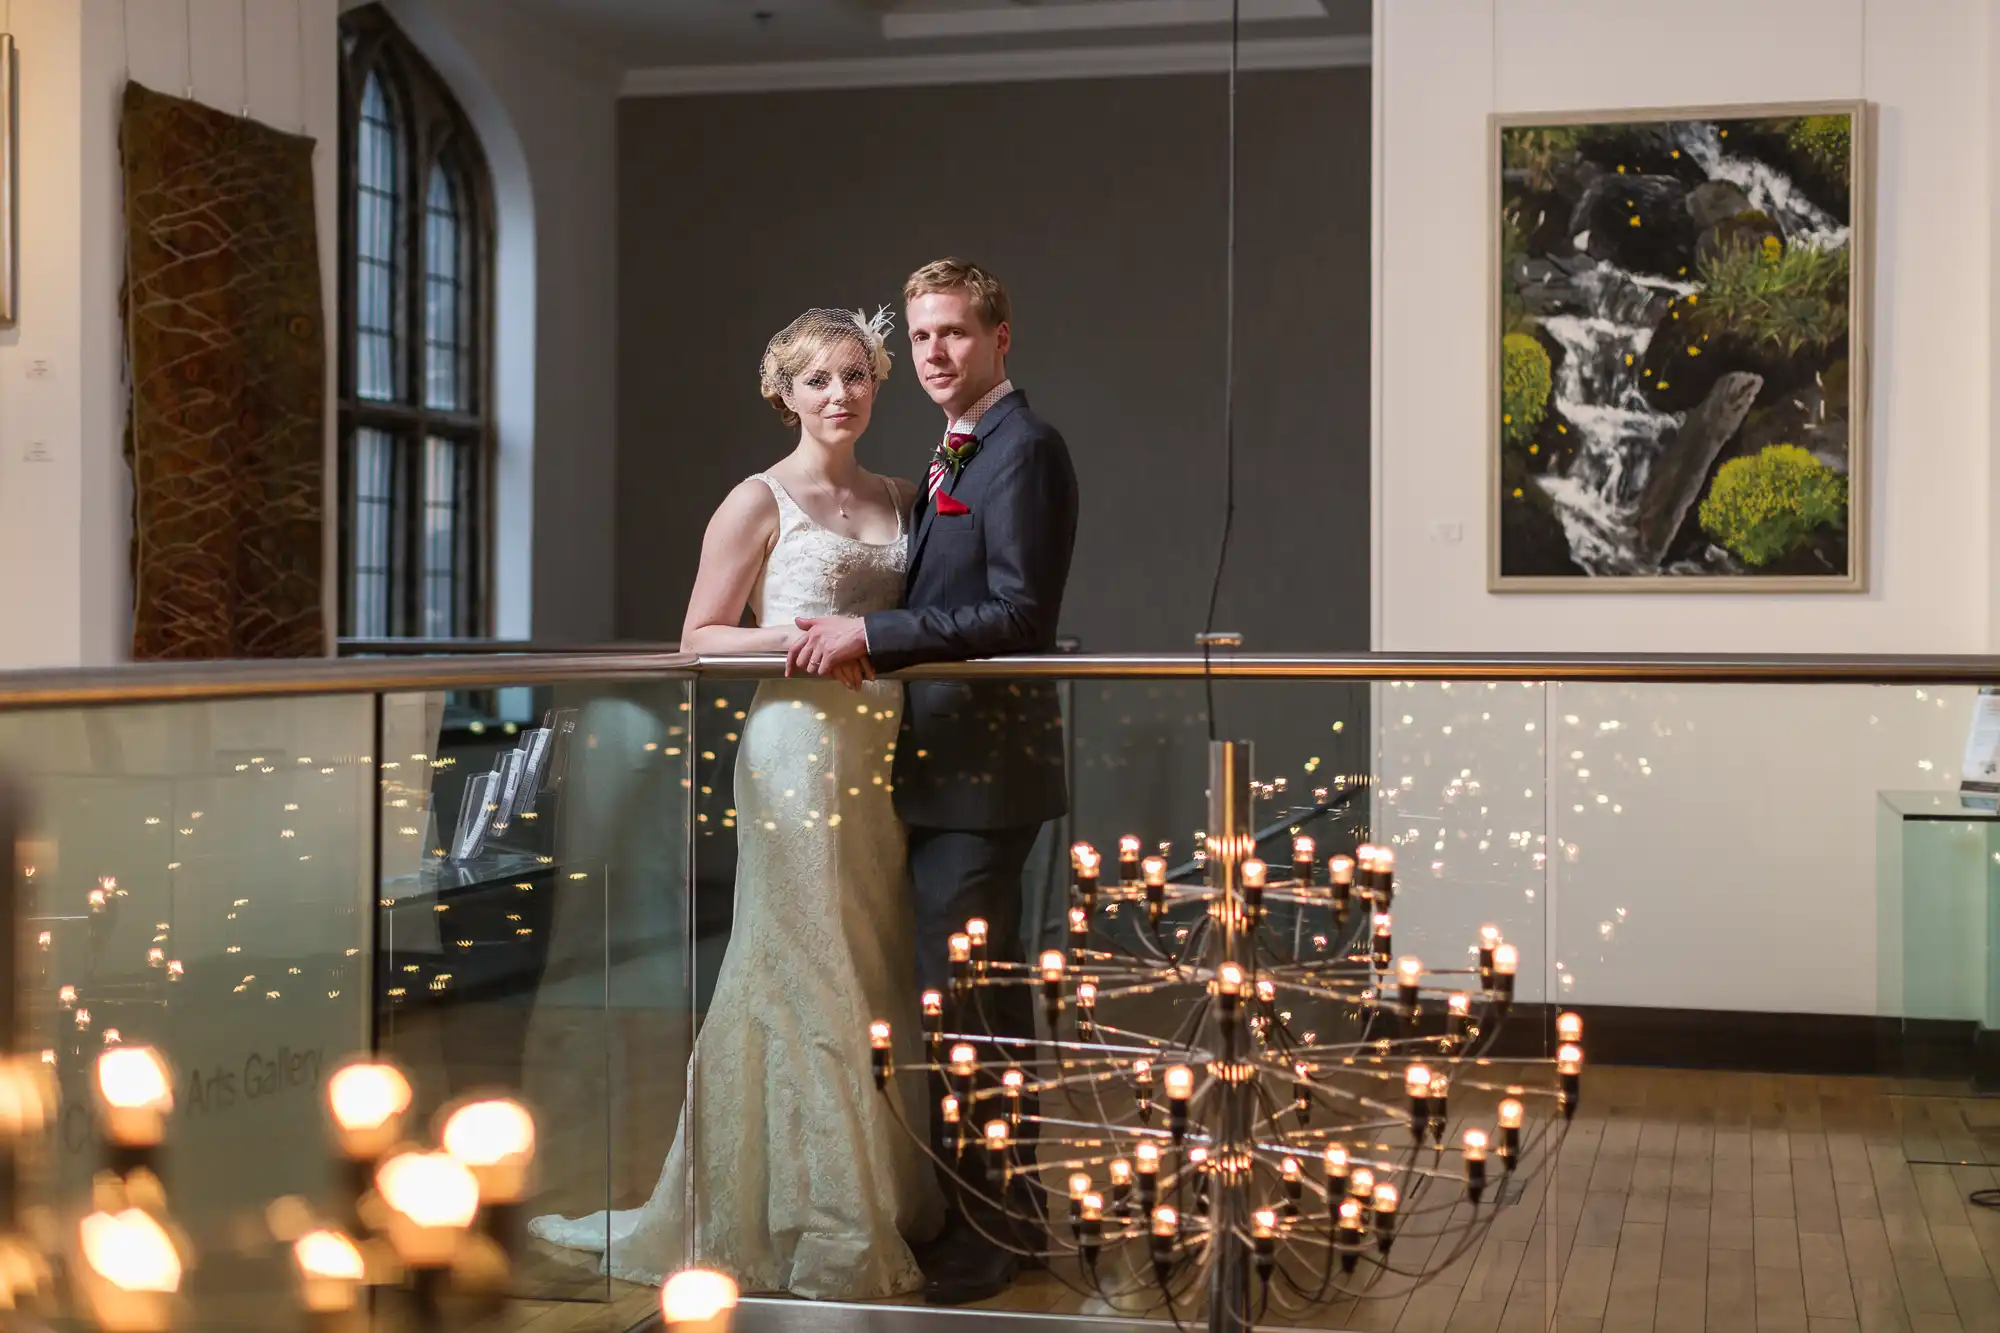 A bride and groom standing together in a museum, with a modern chandelier in the foreground and paintings in the background.